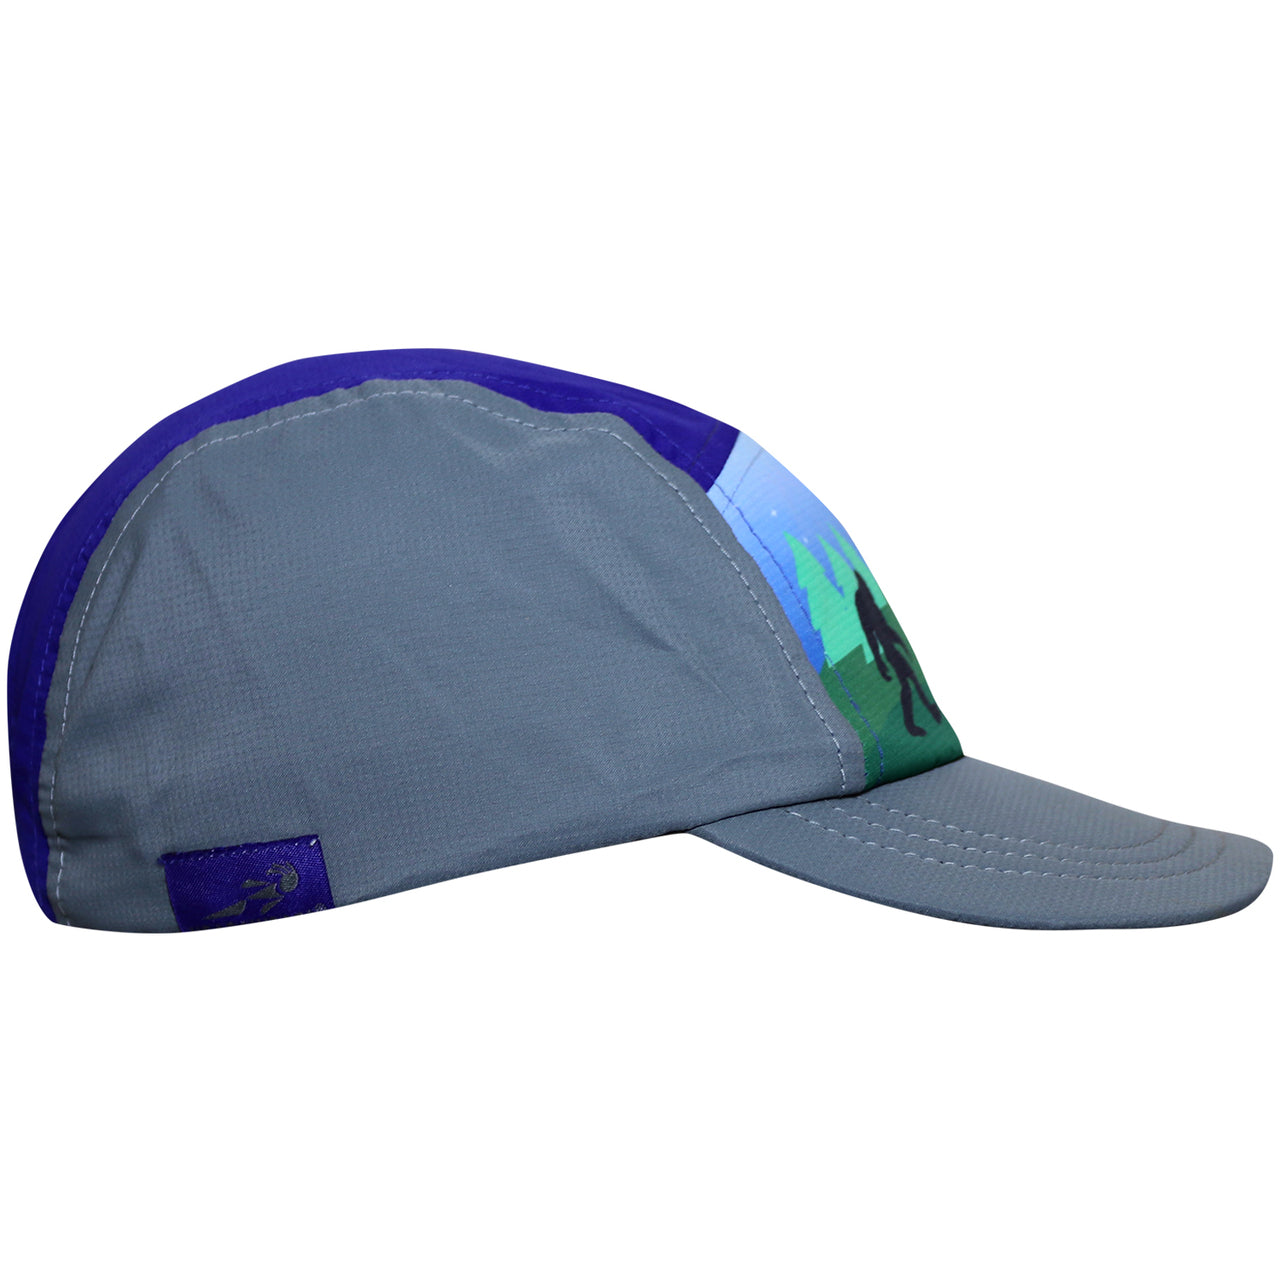 Crusher Hat | Leave No Trace-Headsweats